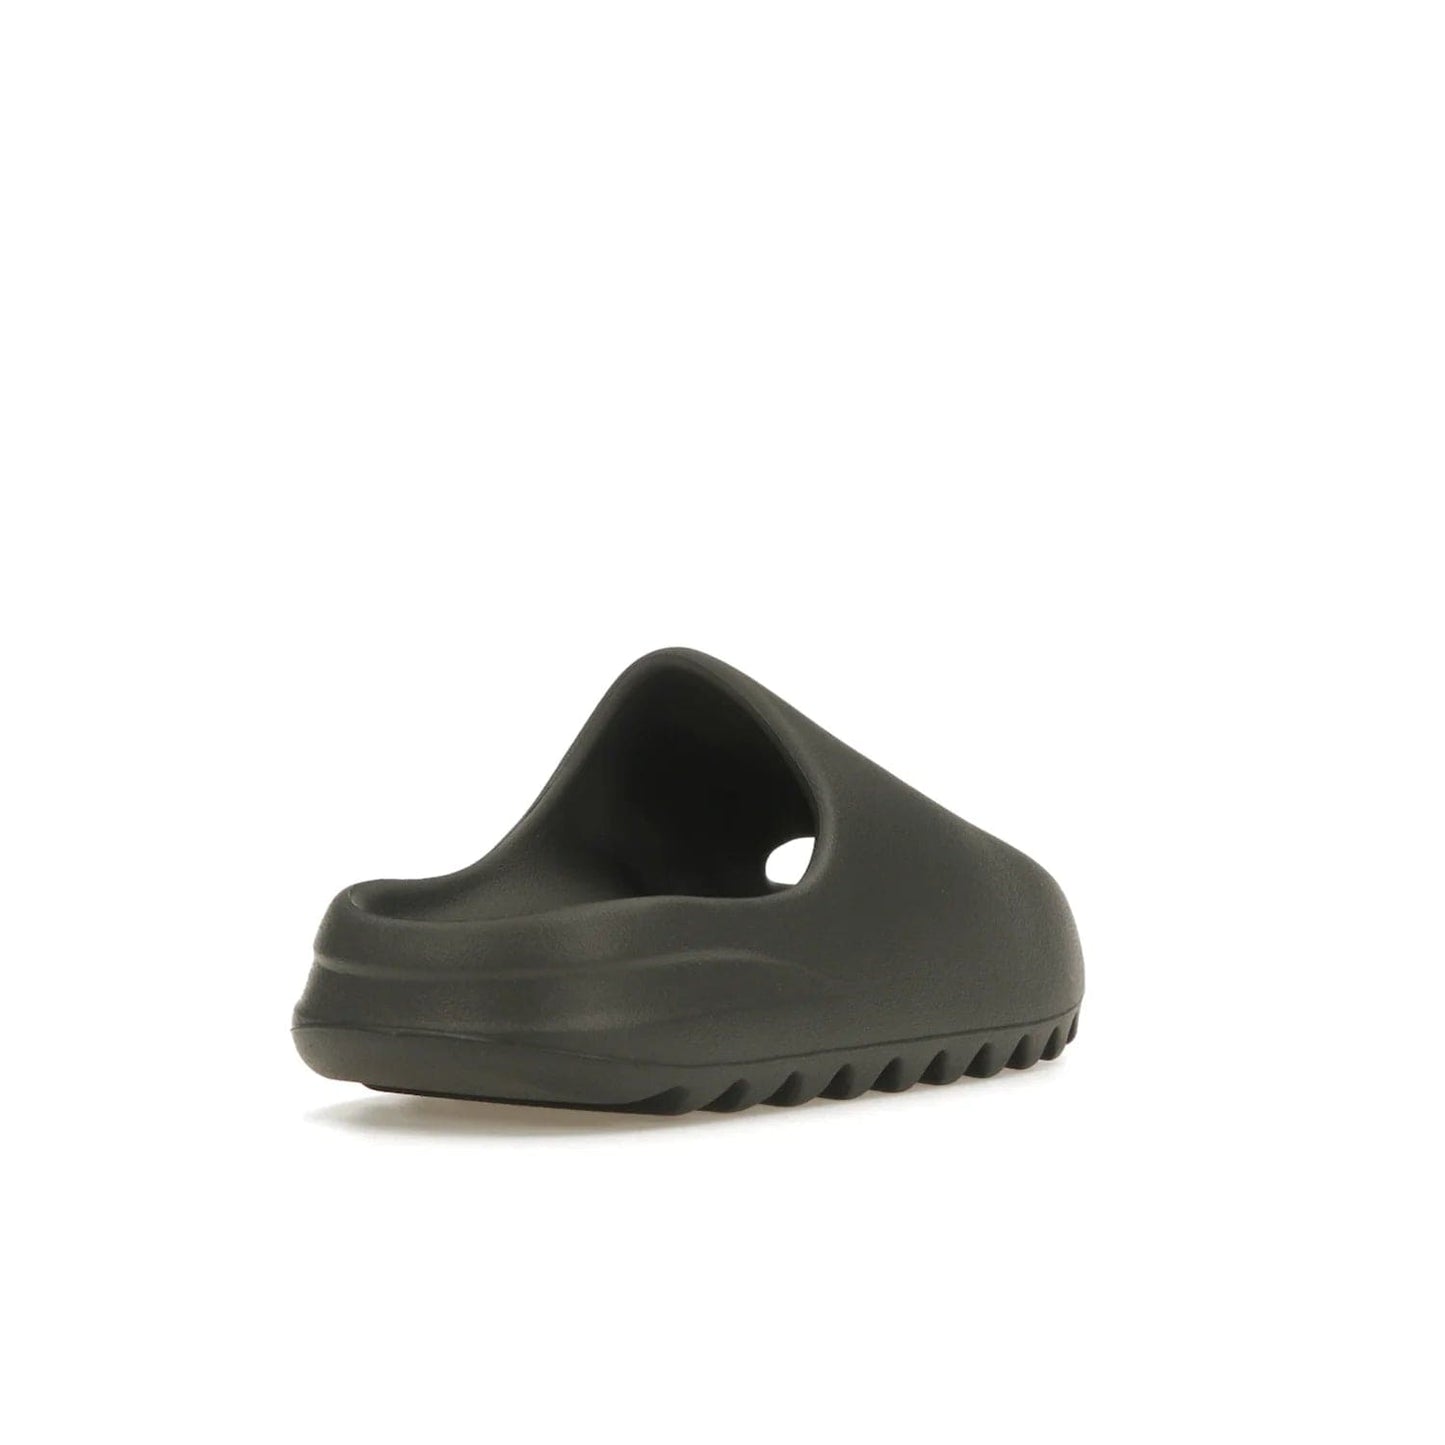 adidas Yeezy Slide Granite - Image 31 - Only at www.BallersClubKickz.com - Introducing the adidas Yeezy Slide Granite with a sleek, soft-to-touch one-piece upper – perfect for making a statement with its minimalistic design and luxurious comfort. Get yours now for only $70.